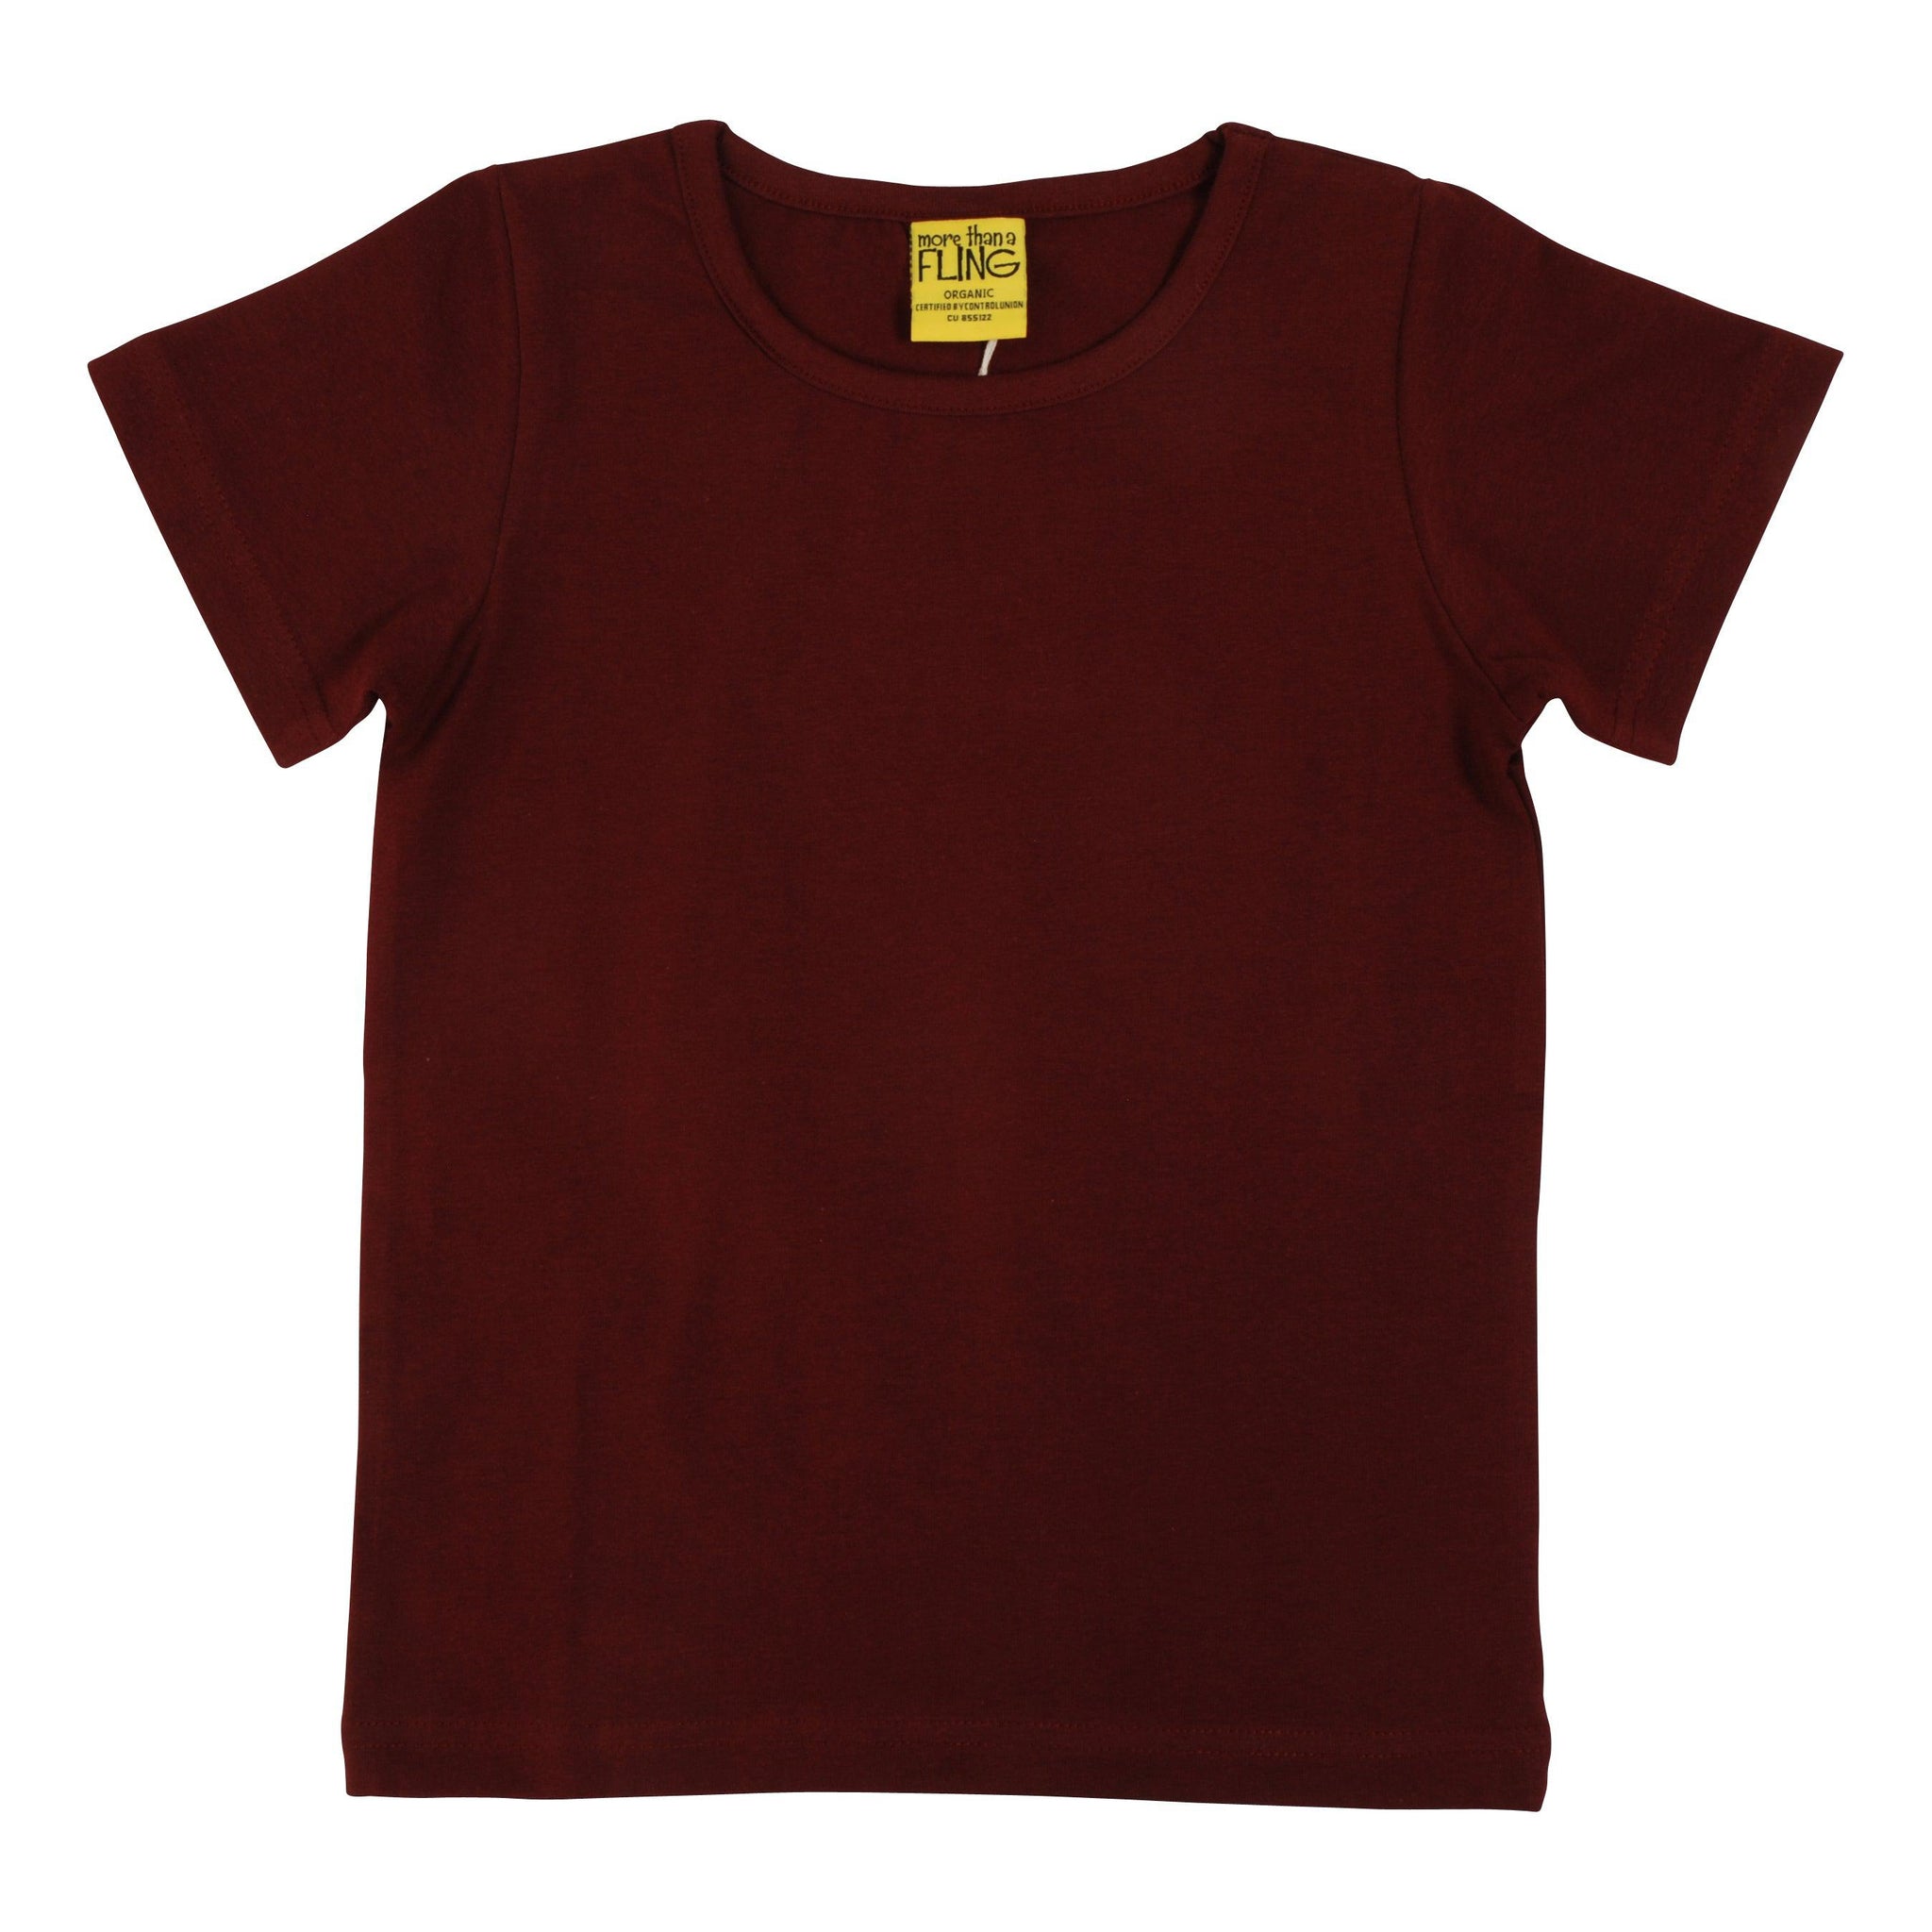 More Than A FLING - Madder Brown Short Sleeved Top